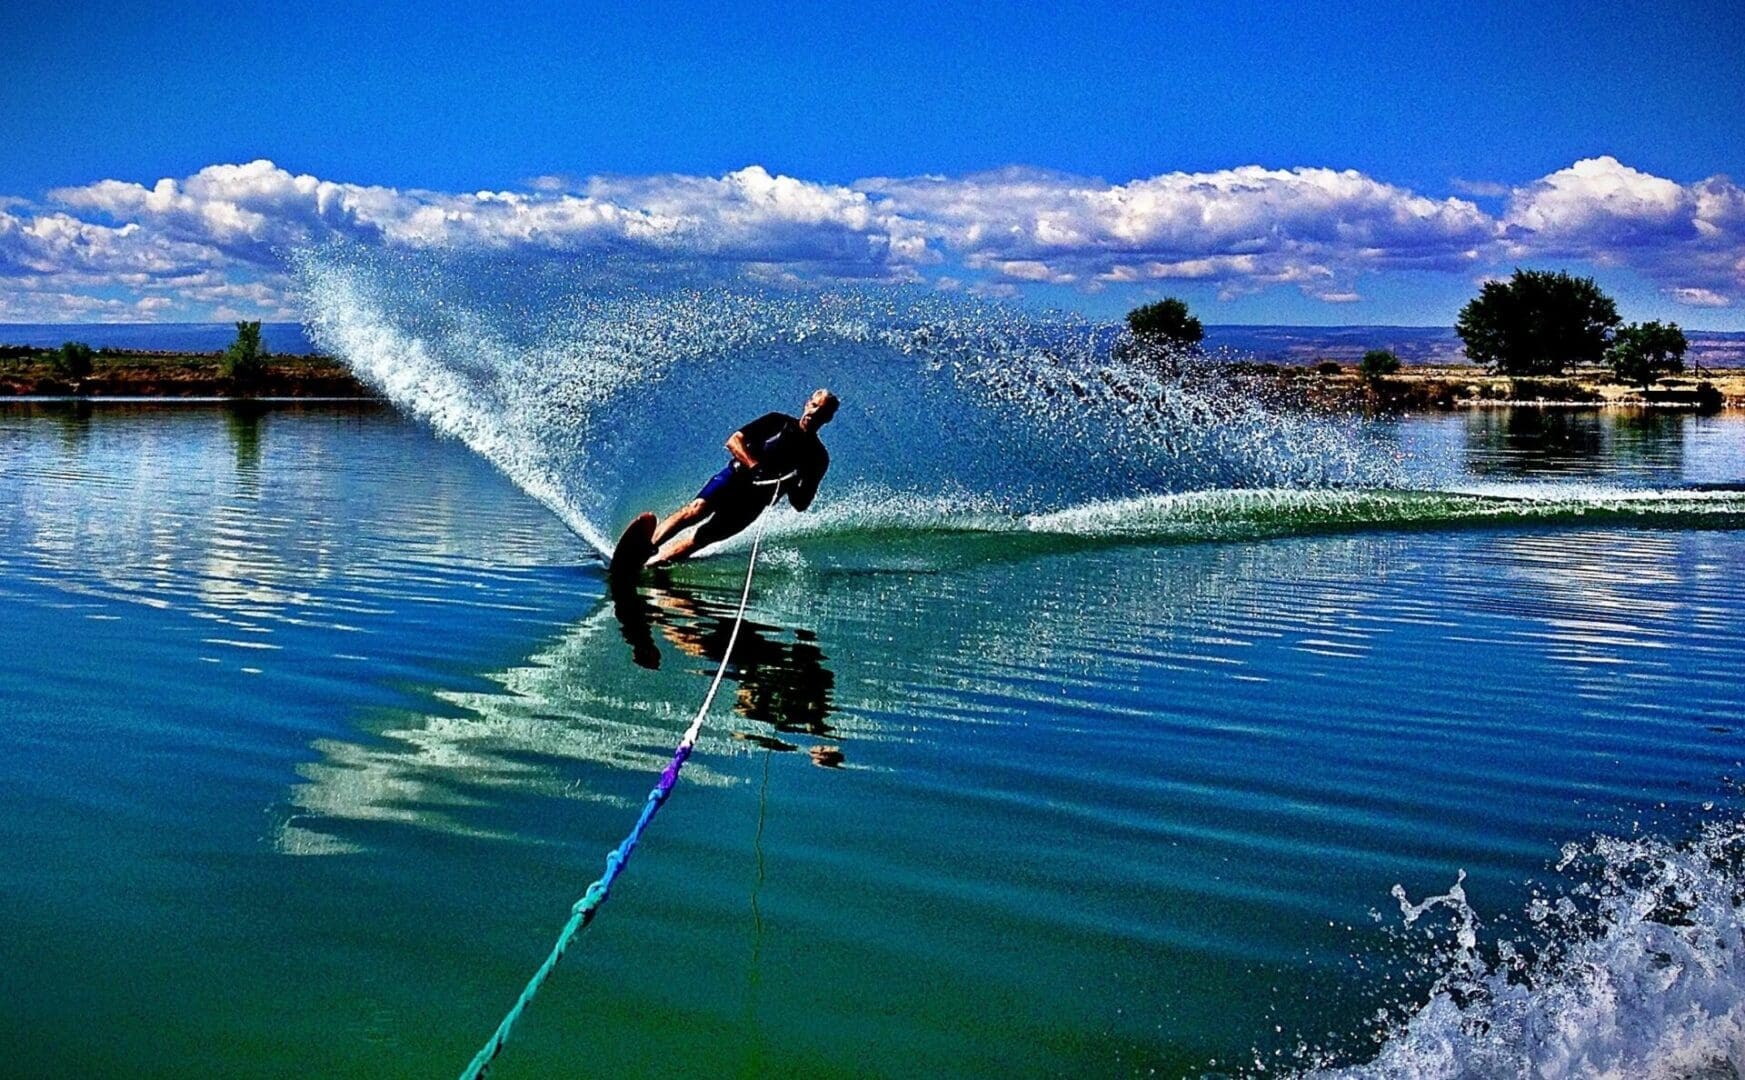 A man is water skiing on a lake.